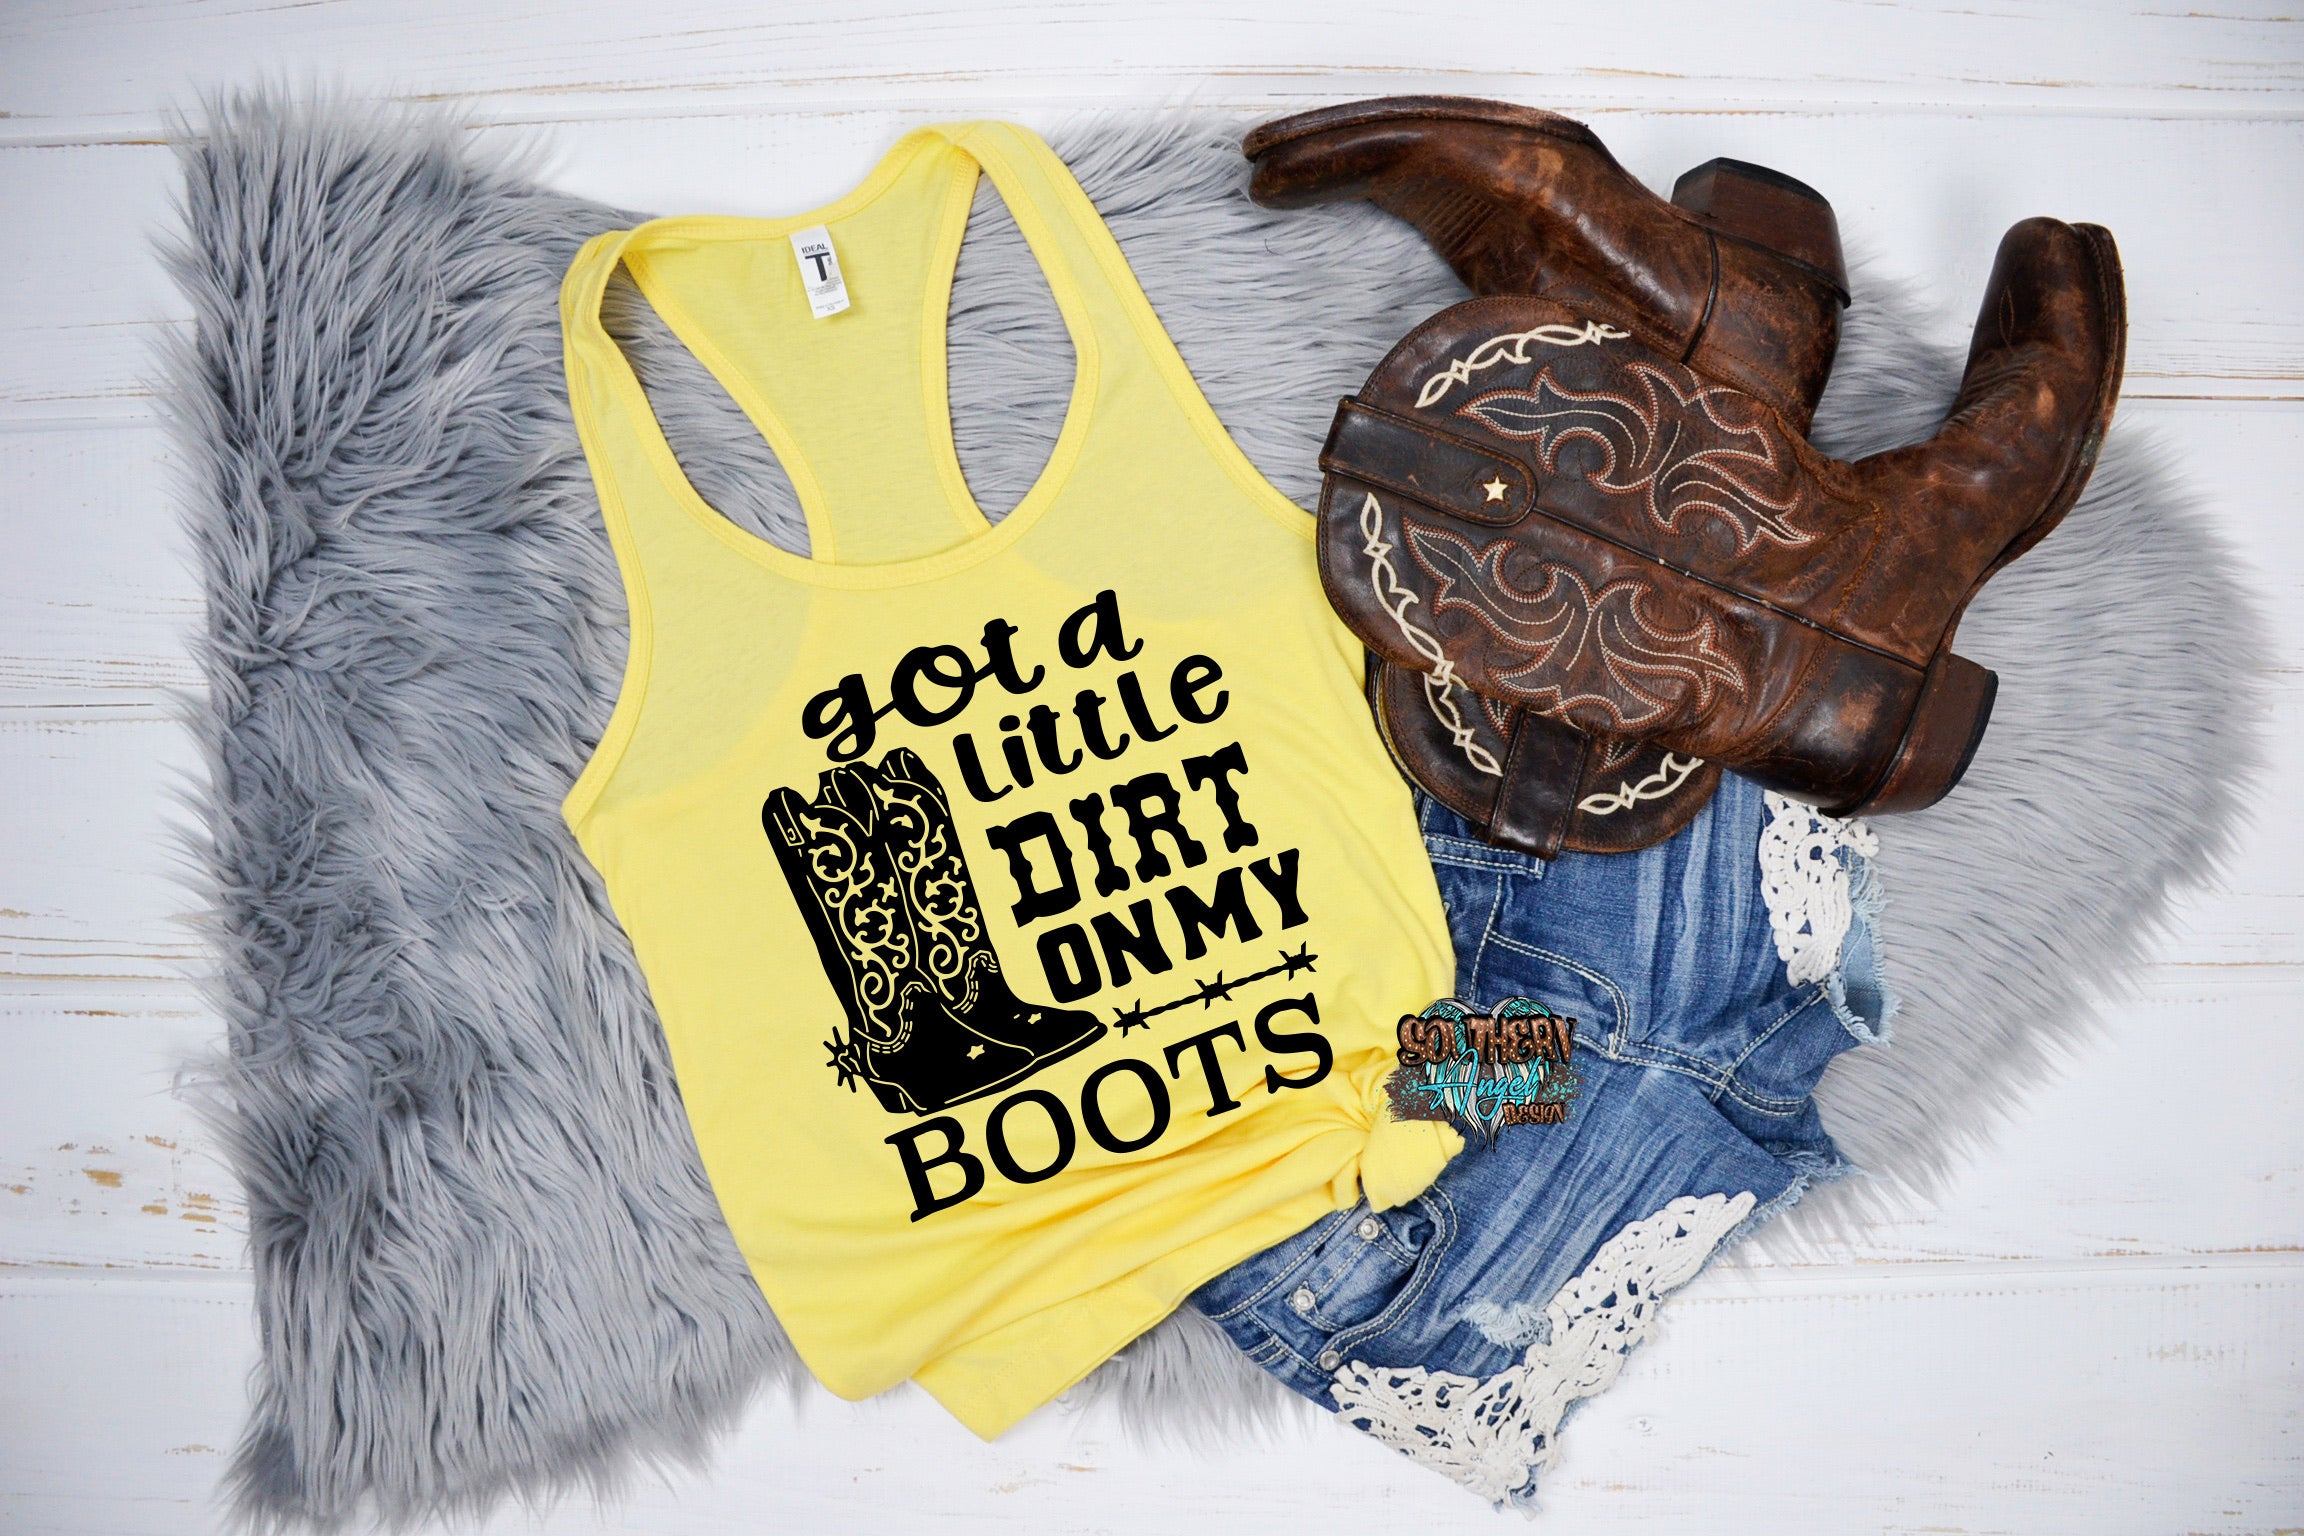 Gray Got A Little Dirt On My Boots Tank image_d27b946b-c790-40f7-9085-22646da11890.jpg got-a-little-dirt-on-my-boots-tank-country-music-tank-womens-rodeo-tank-concert-t-shirt-country-music-festival-country-girl-tank-1 Concert & Rodeo